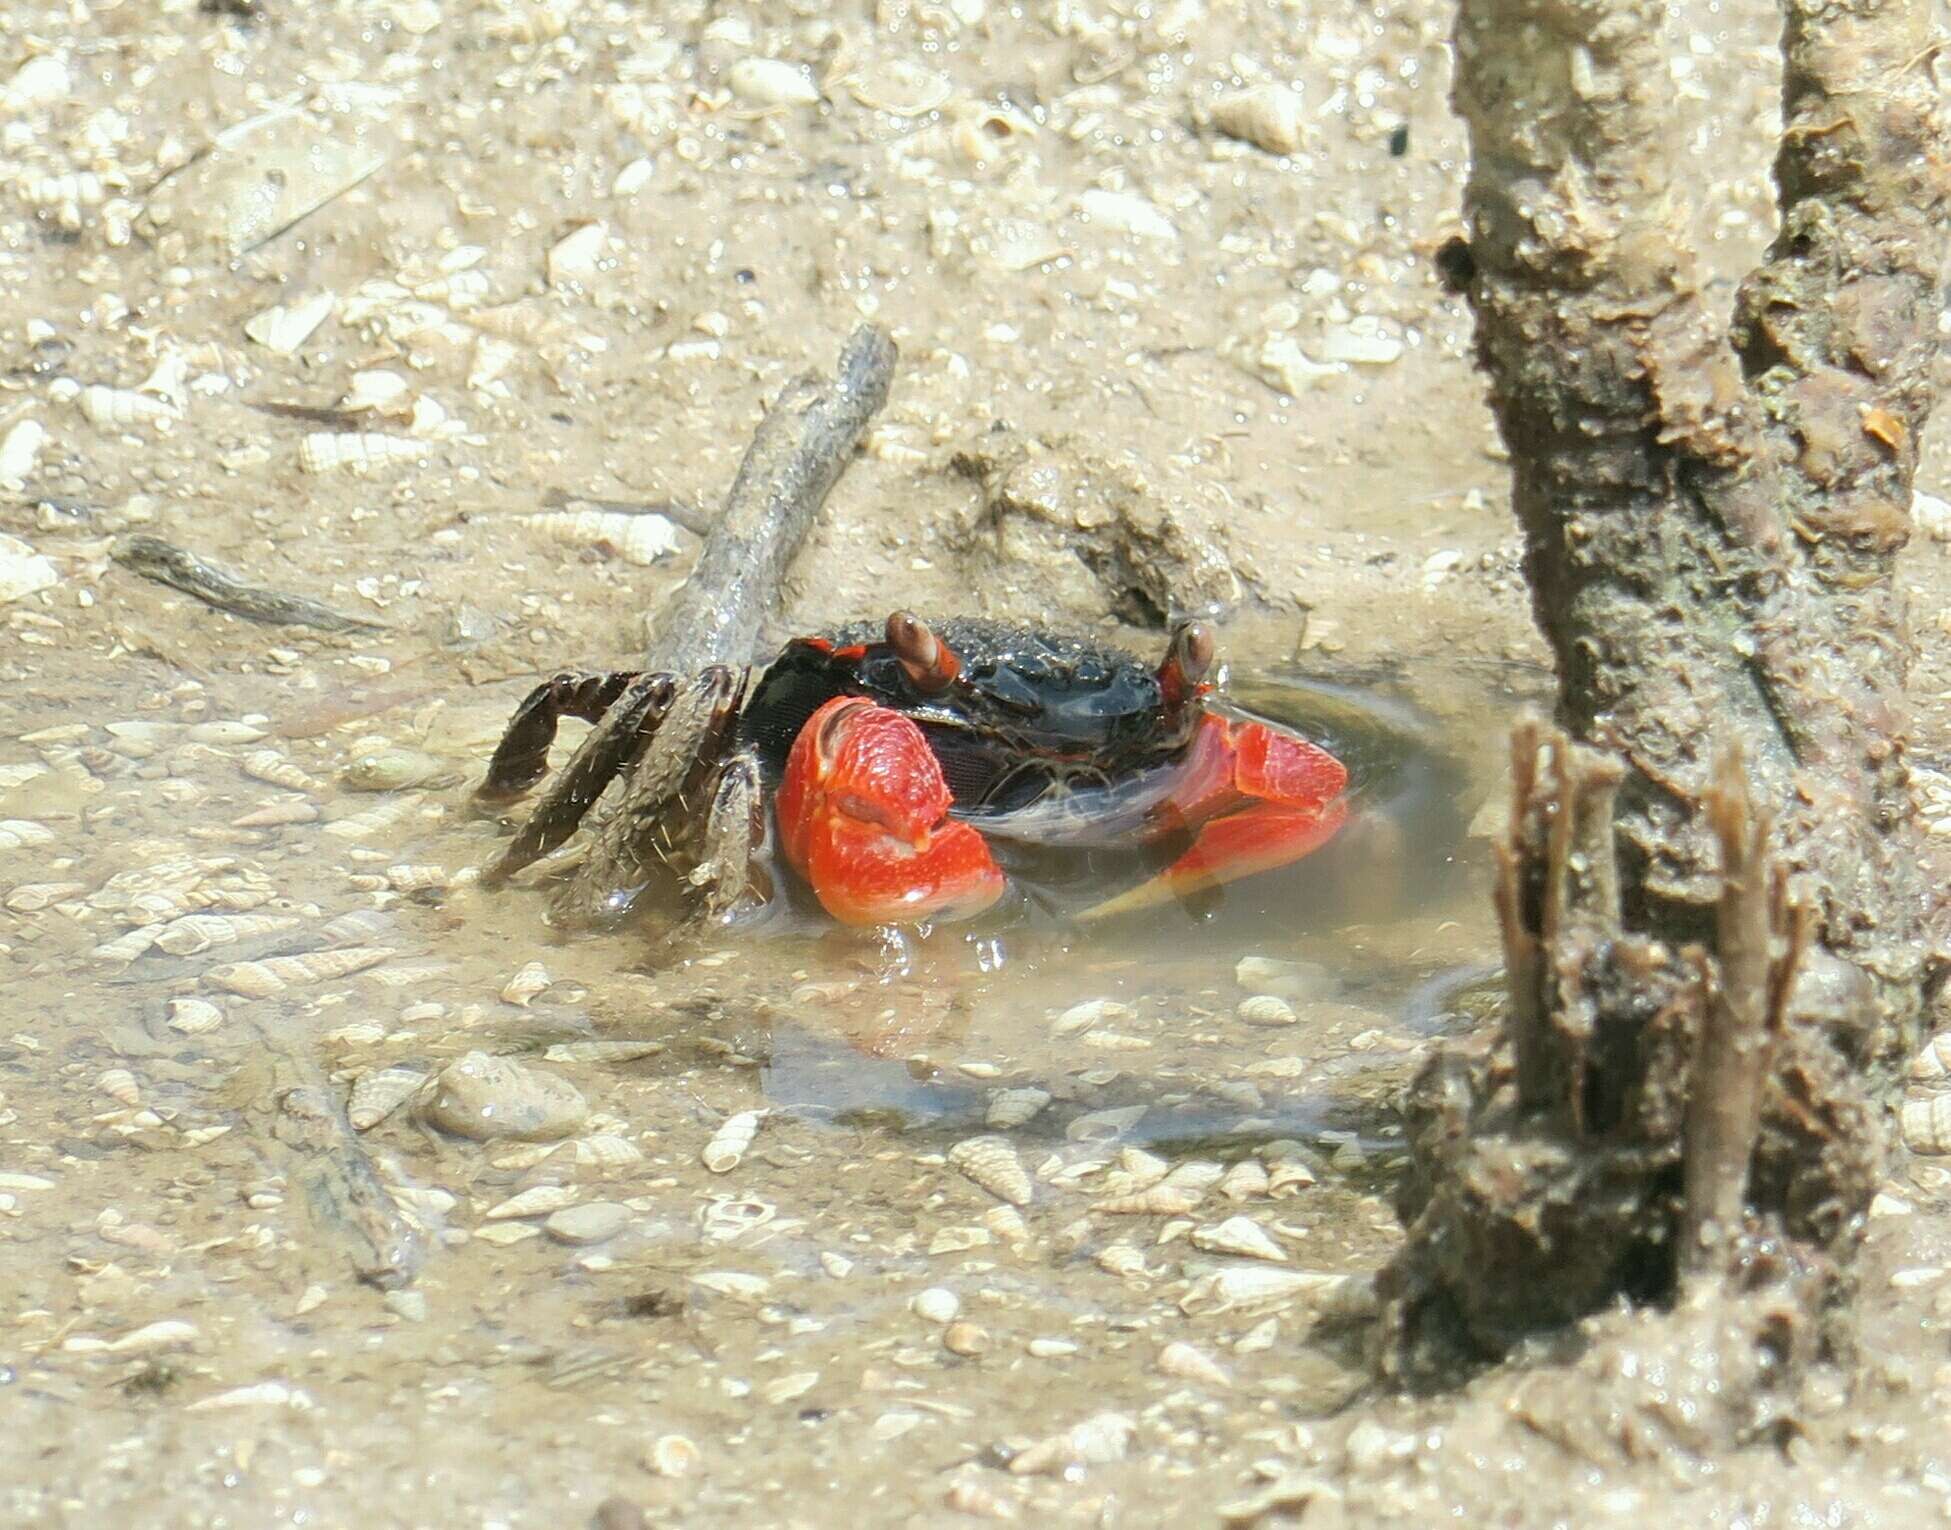 Image of East African red mangrove crab